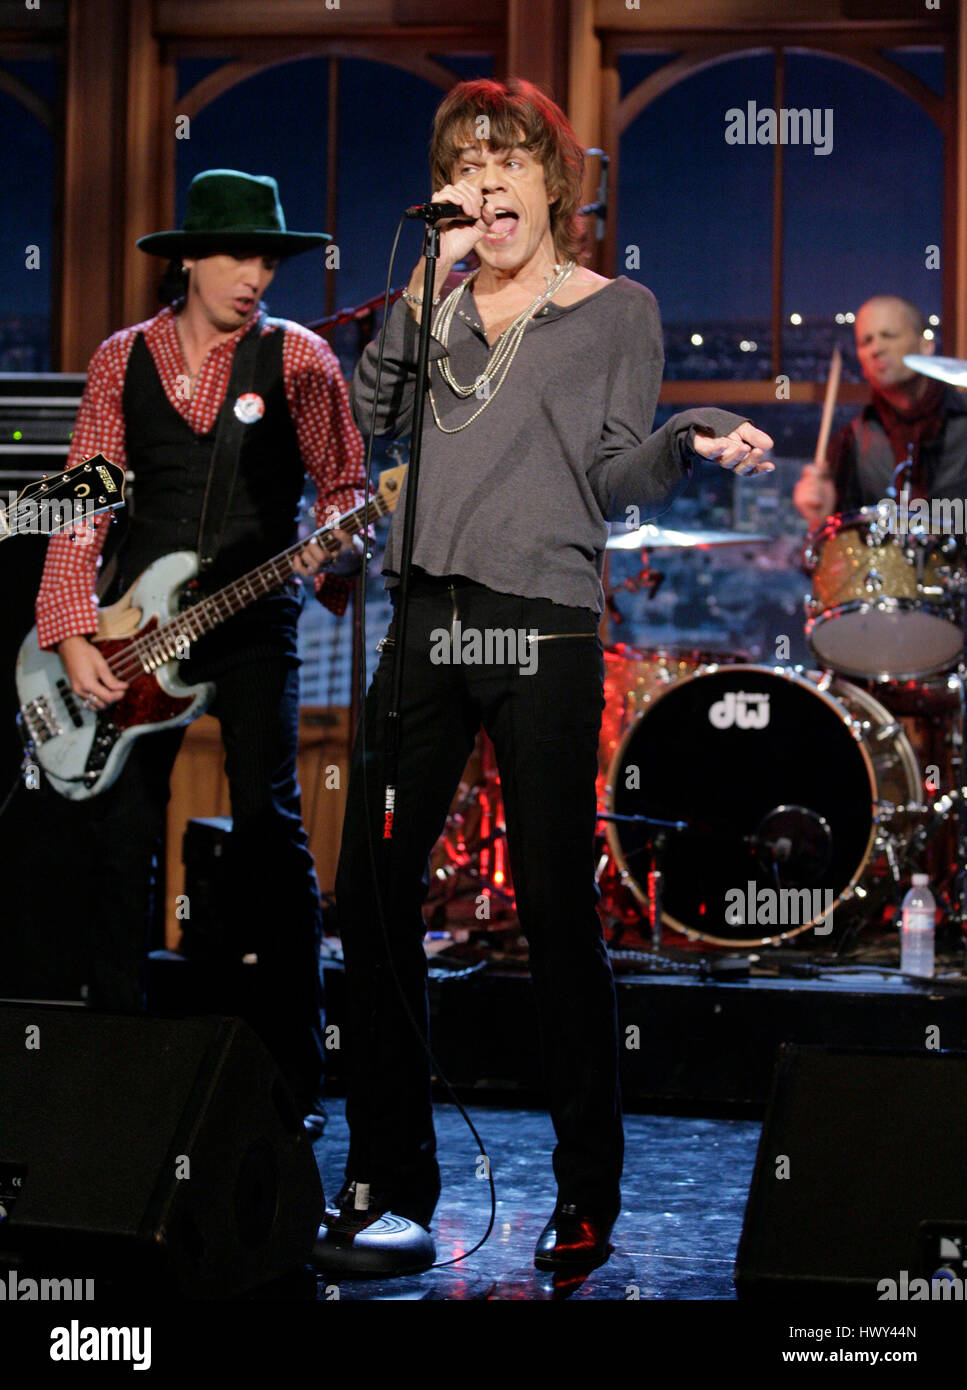 The band, 'New York Dolls' with David Johansen on lead vocals,  Brian Delaney on drums, Sami Takamaki-Guy on bass, perform during a segment of 'The Late Late Show with Craig Ferguson' at CBS Television City in Los Angeles on Tuesday, Oct. 28, 2008. Photo by Francis Specker Stock Photo